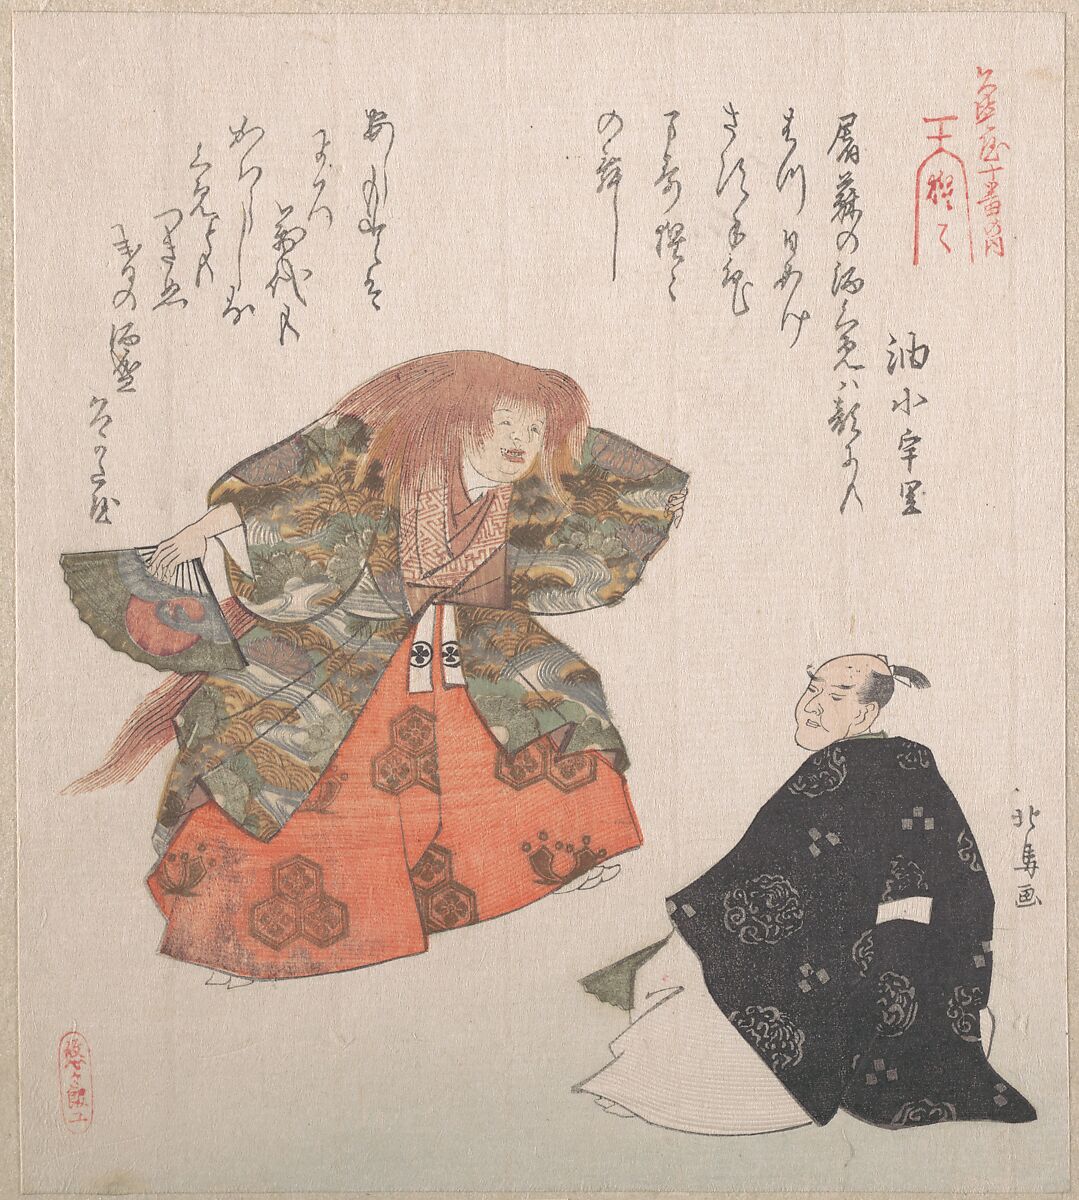 Scene from the Noh Dance "Shojo", Teisai Hokuba (Japanese, 1771–1844), Part of an album of woodblock prints (surimono); ink and color on paper, Japan 